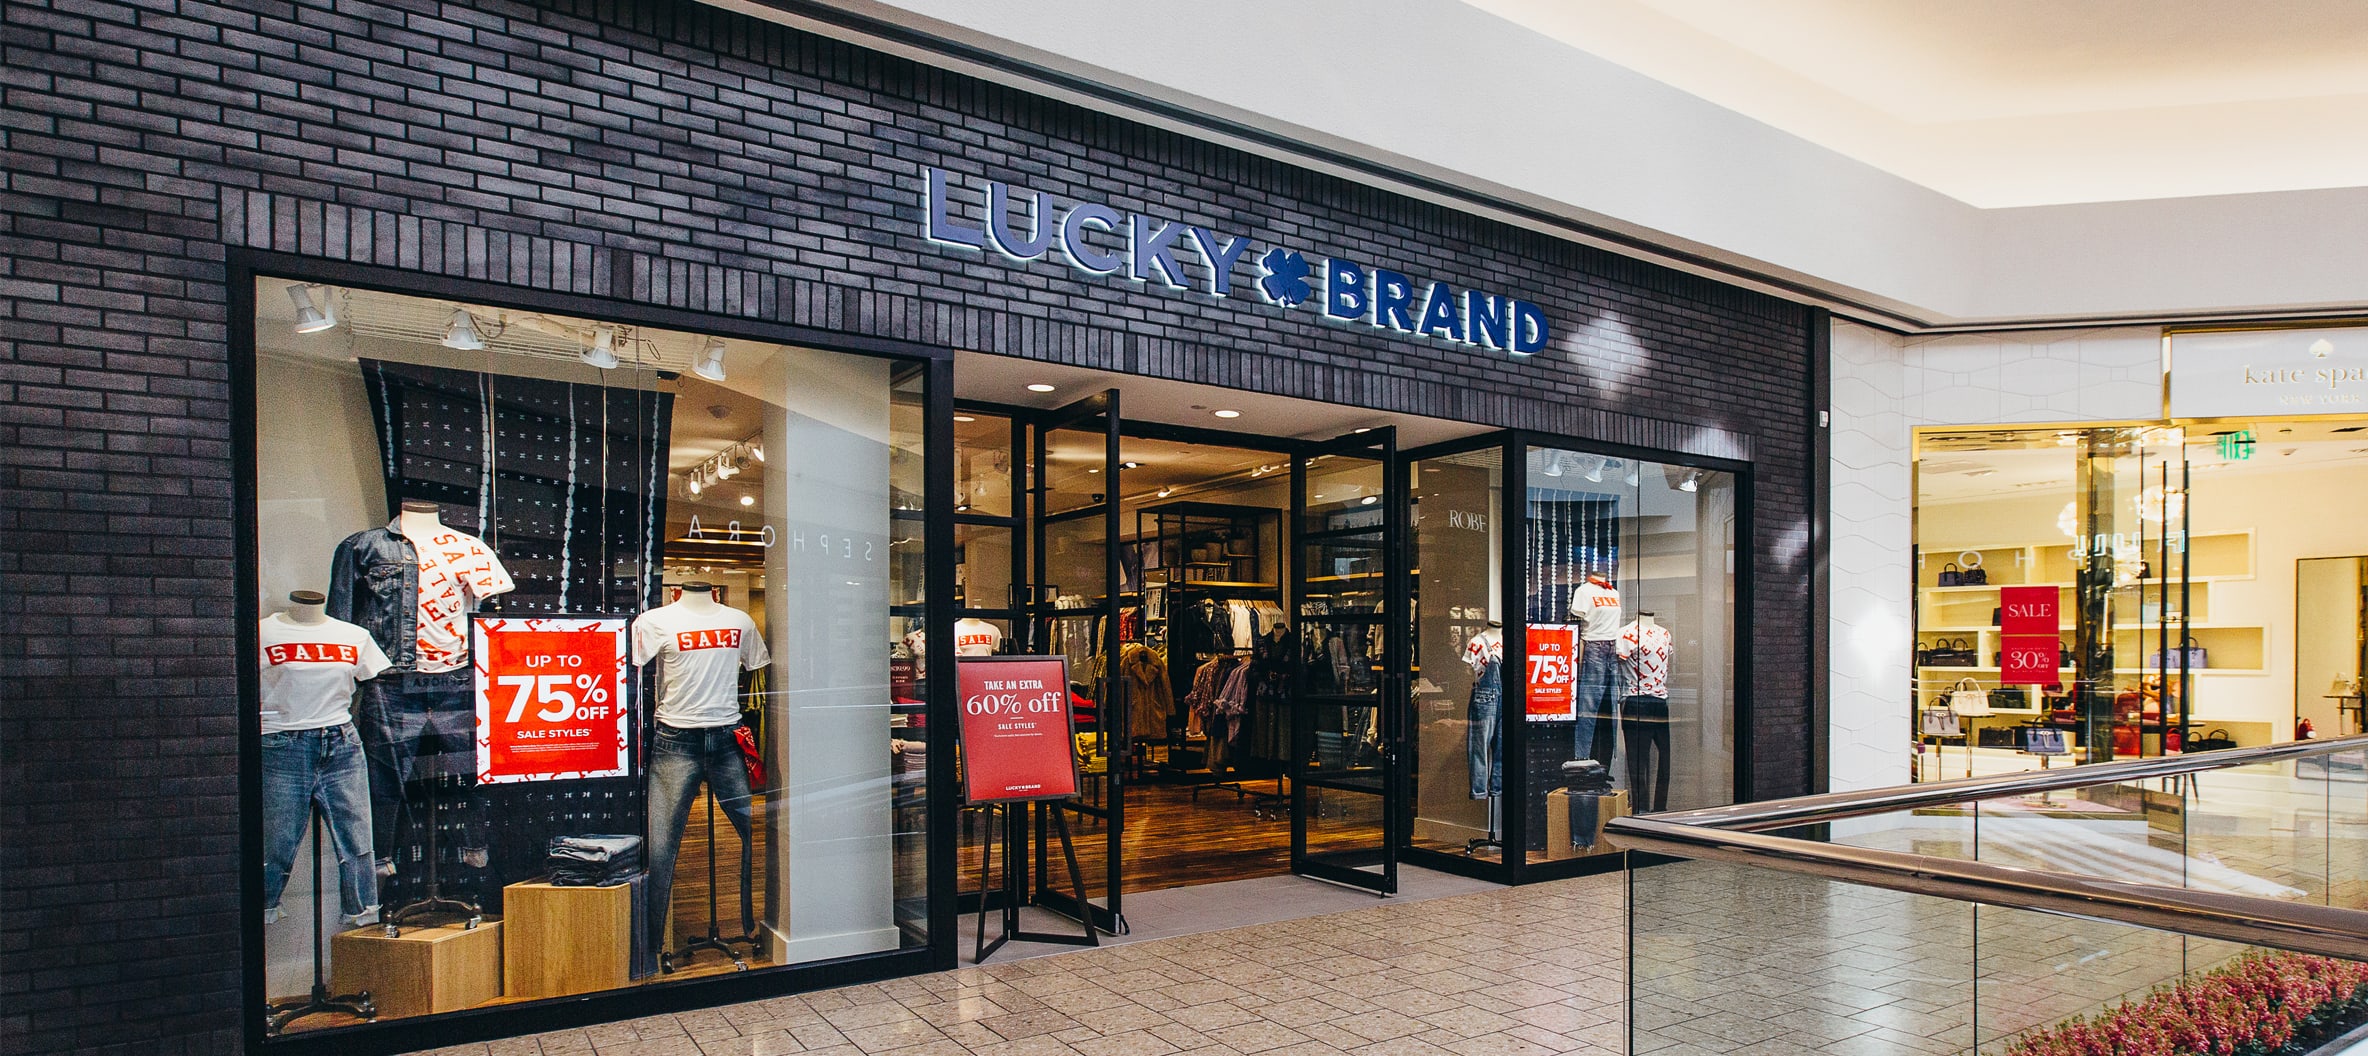 lucky brand jeans store near me